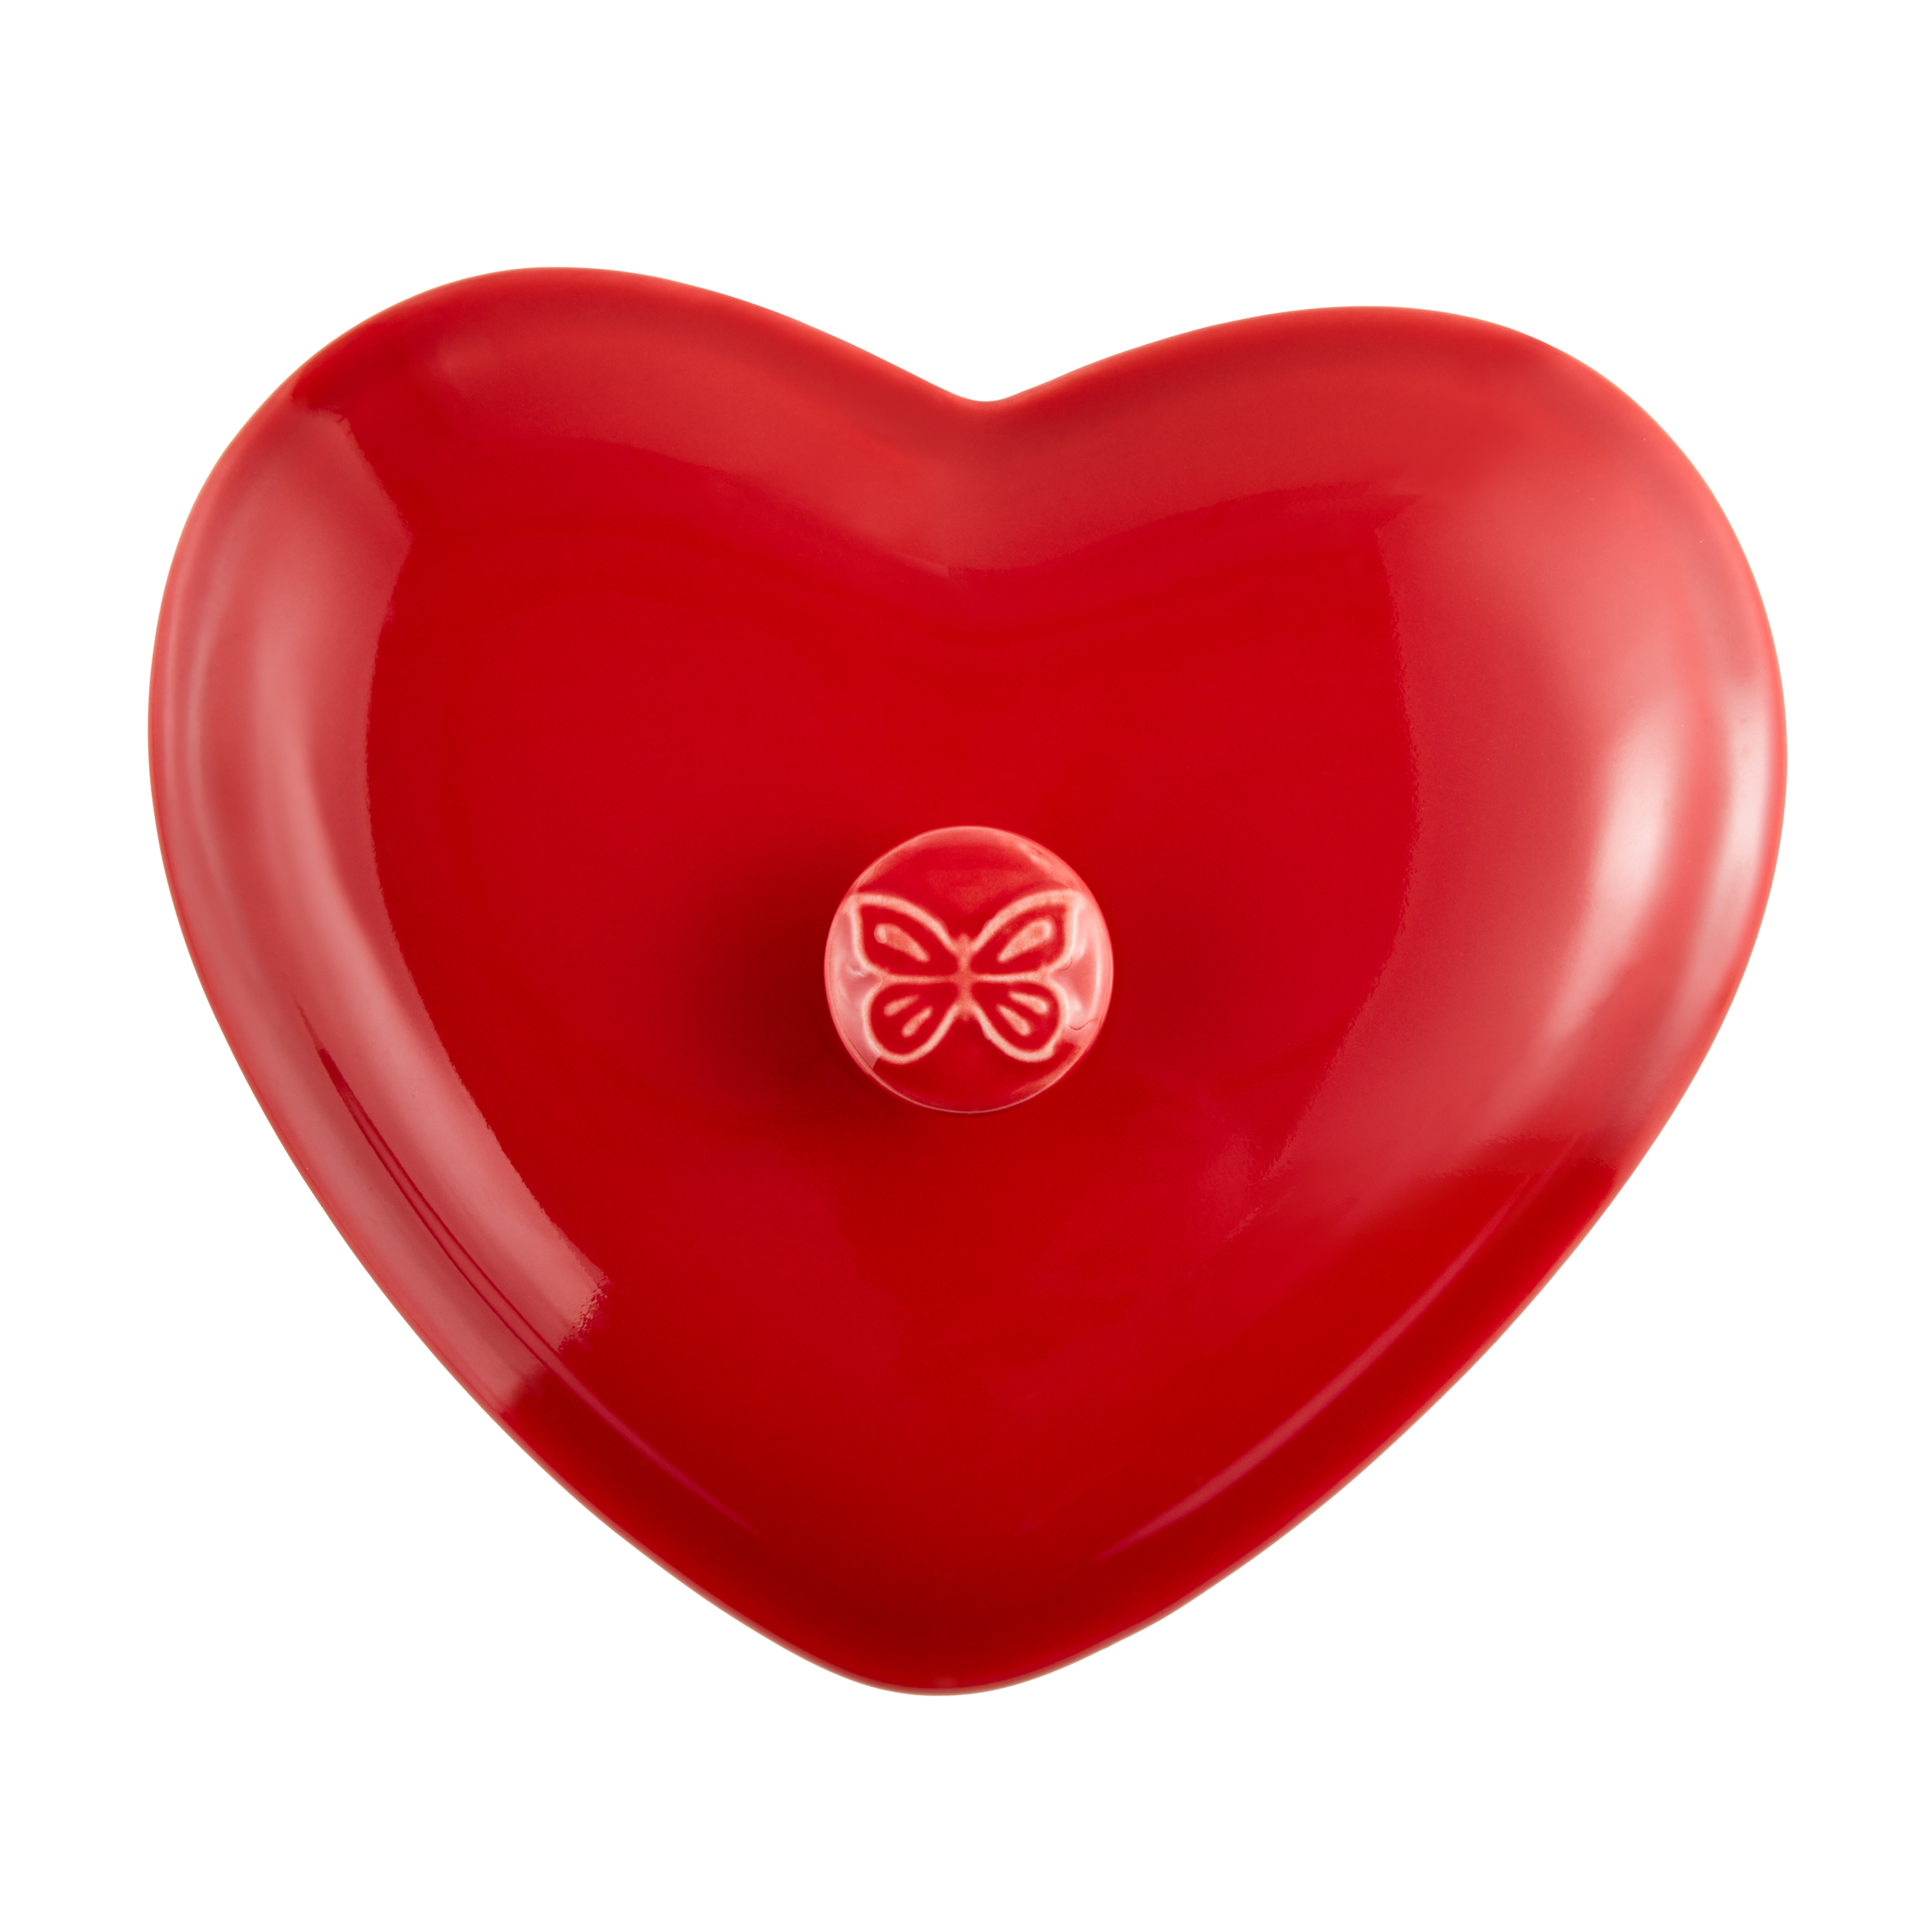 3 Red Mini Heart, Ceramic Baking Dish with Lid, The Pioneer Woman 6.45" - image 2 of 7